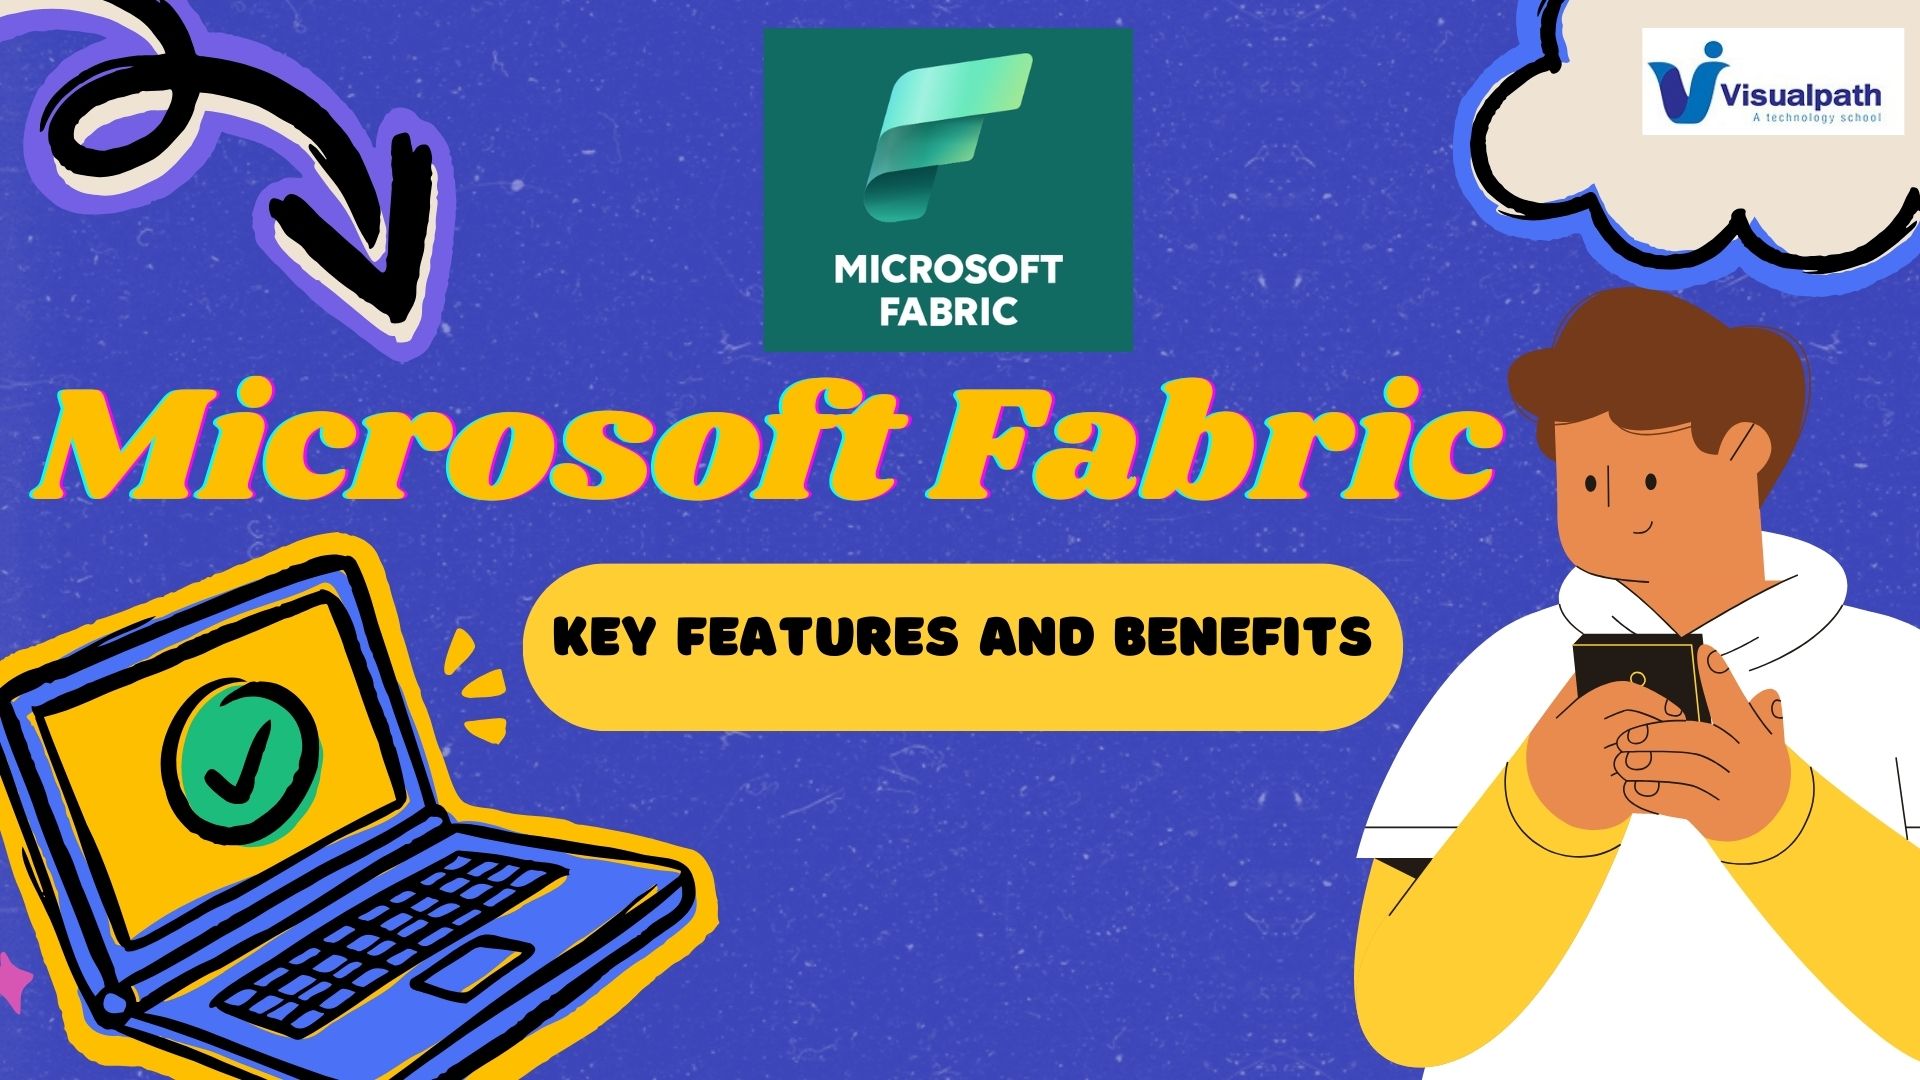 Key Features and Benefits of Microsoft Fabric